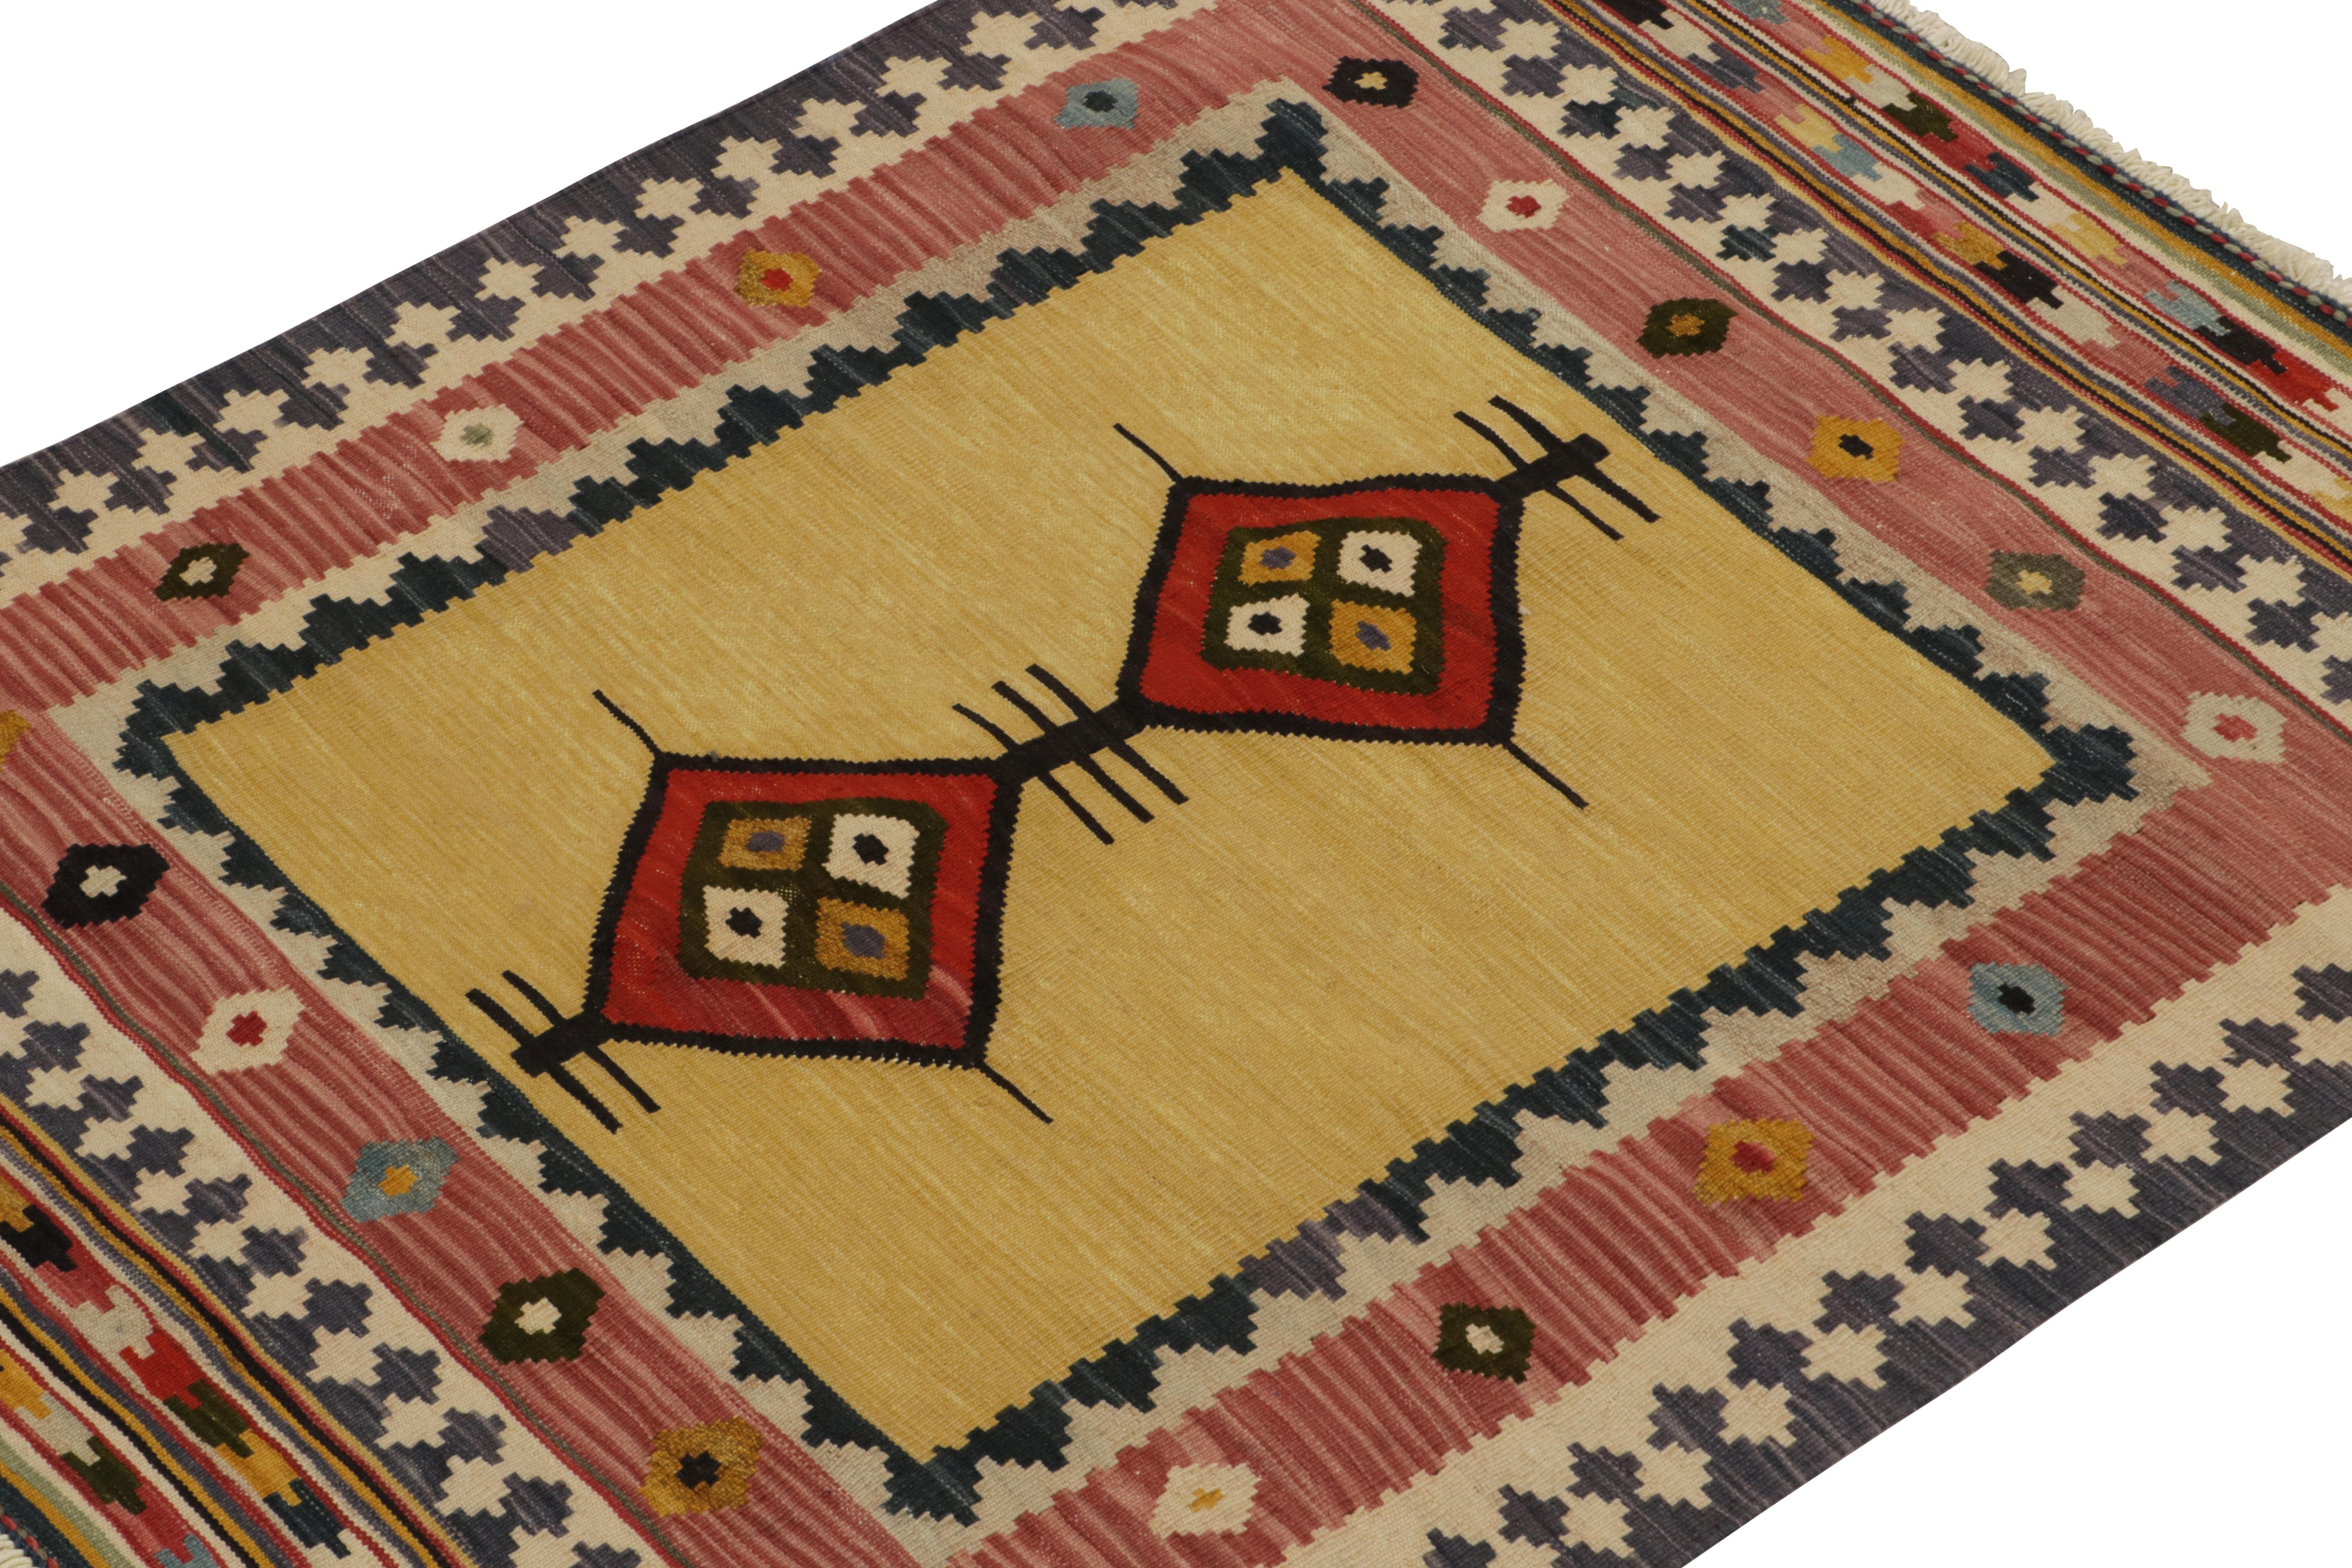 Hand-Knotted Vintage Sofreh Kilim Rug in Camel, Red Medallions Tribal Borders by Rug & Kilim For Sale